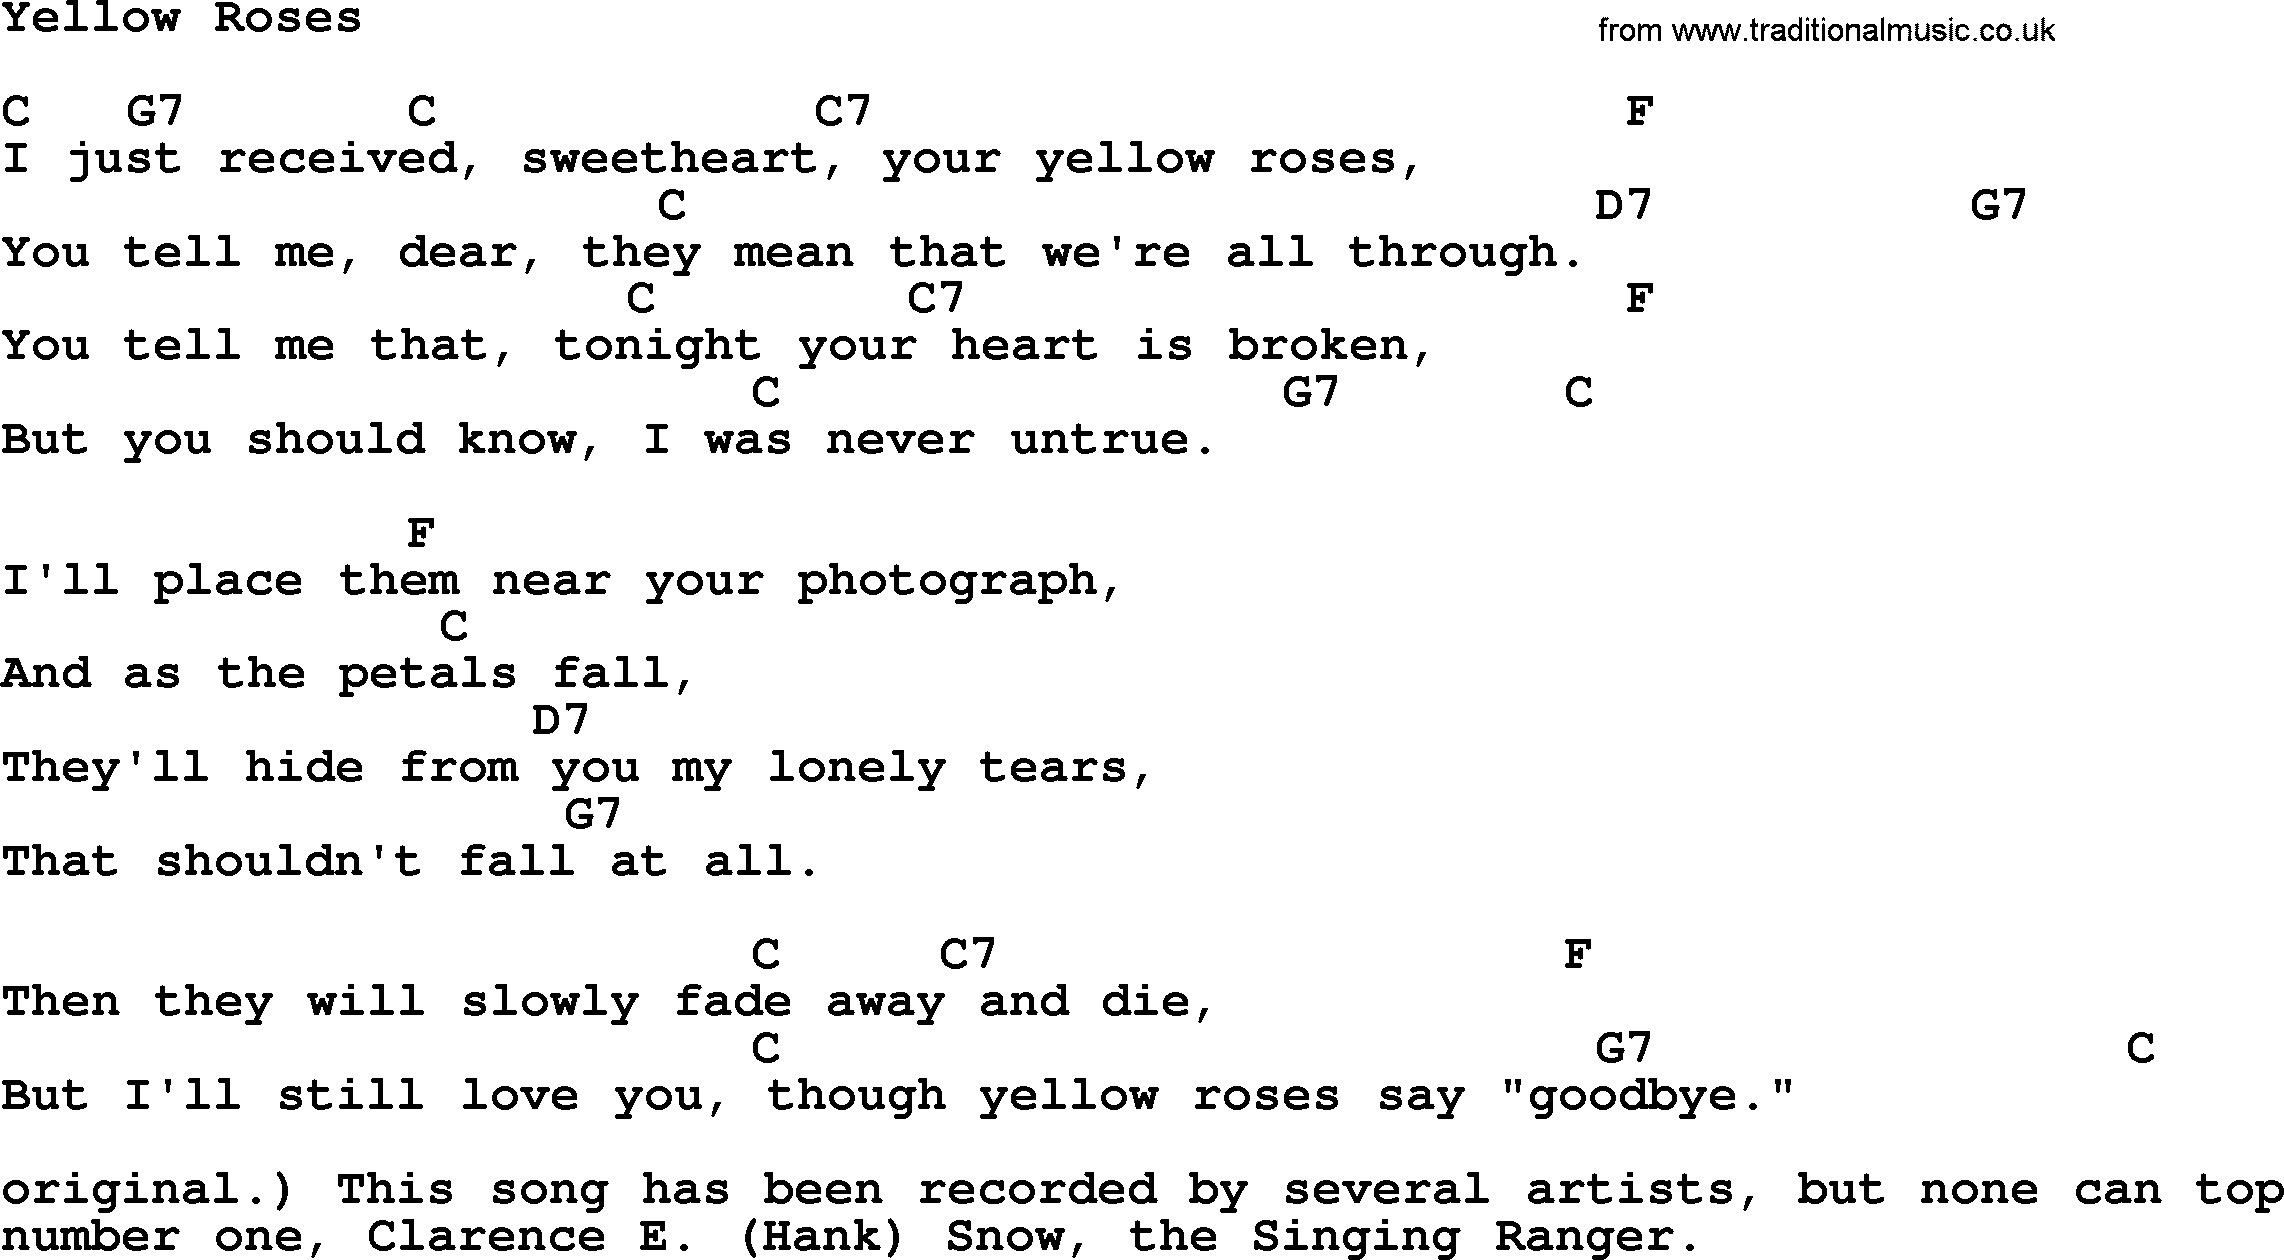 Bluegrass song: Yellow Roses, lyrics and chords